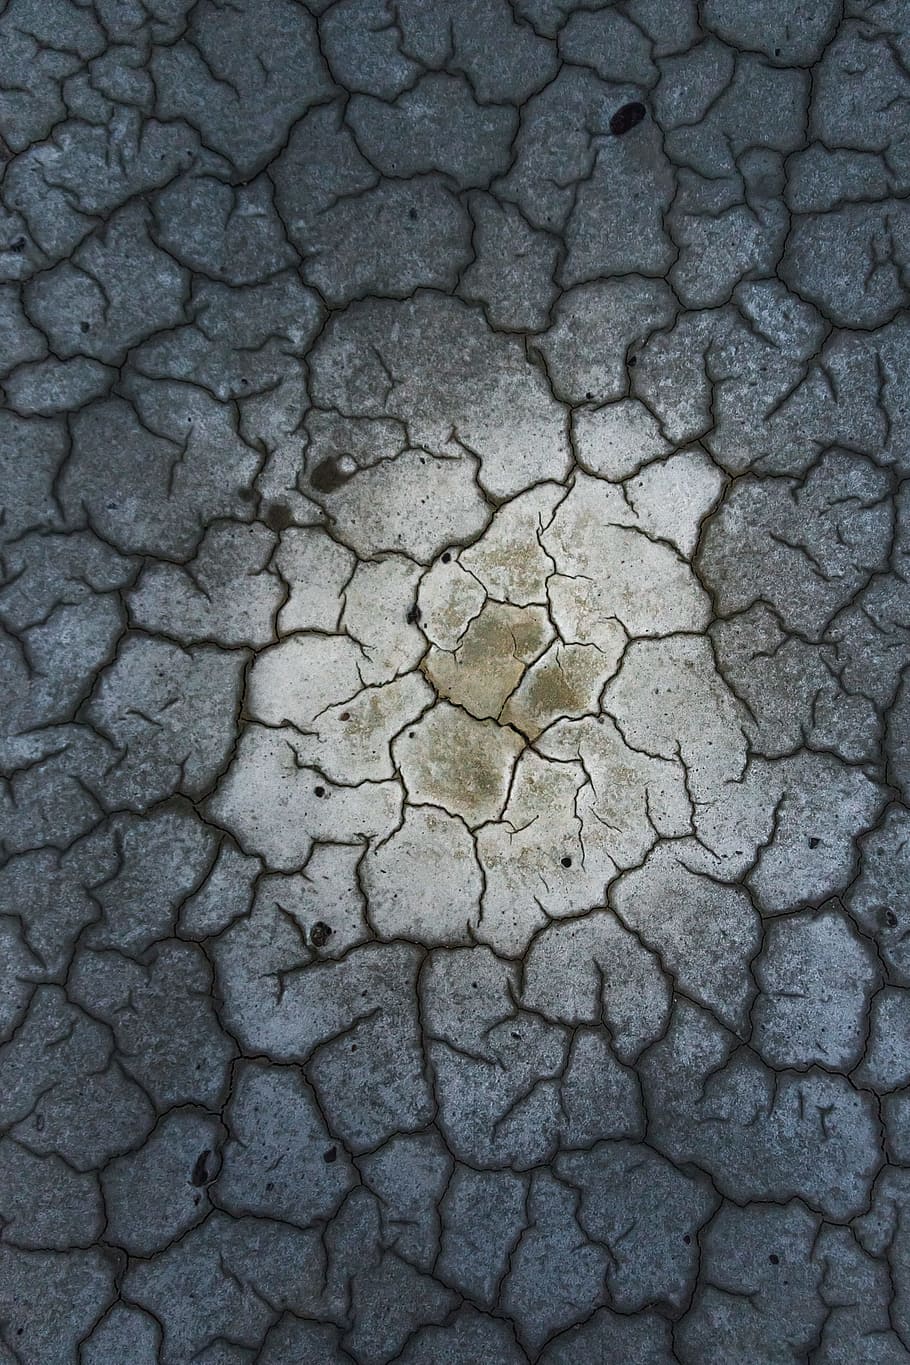 cracked soil, earth, weathered, dry, arid, nature, black and white